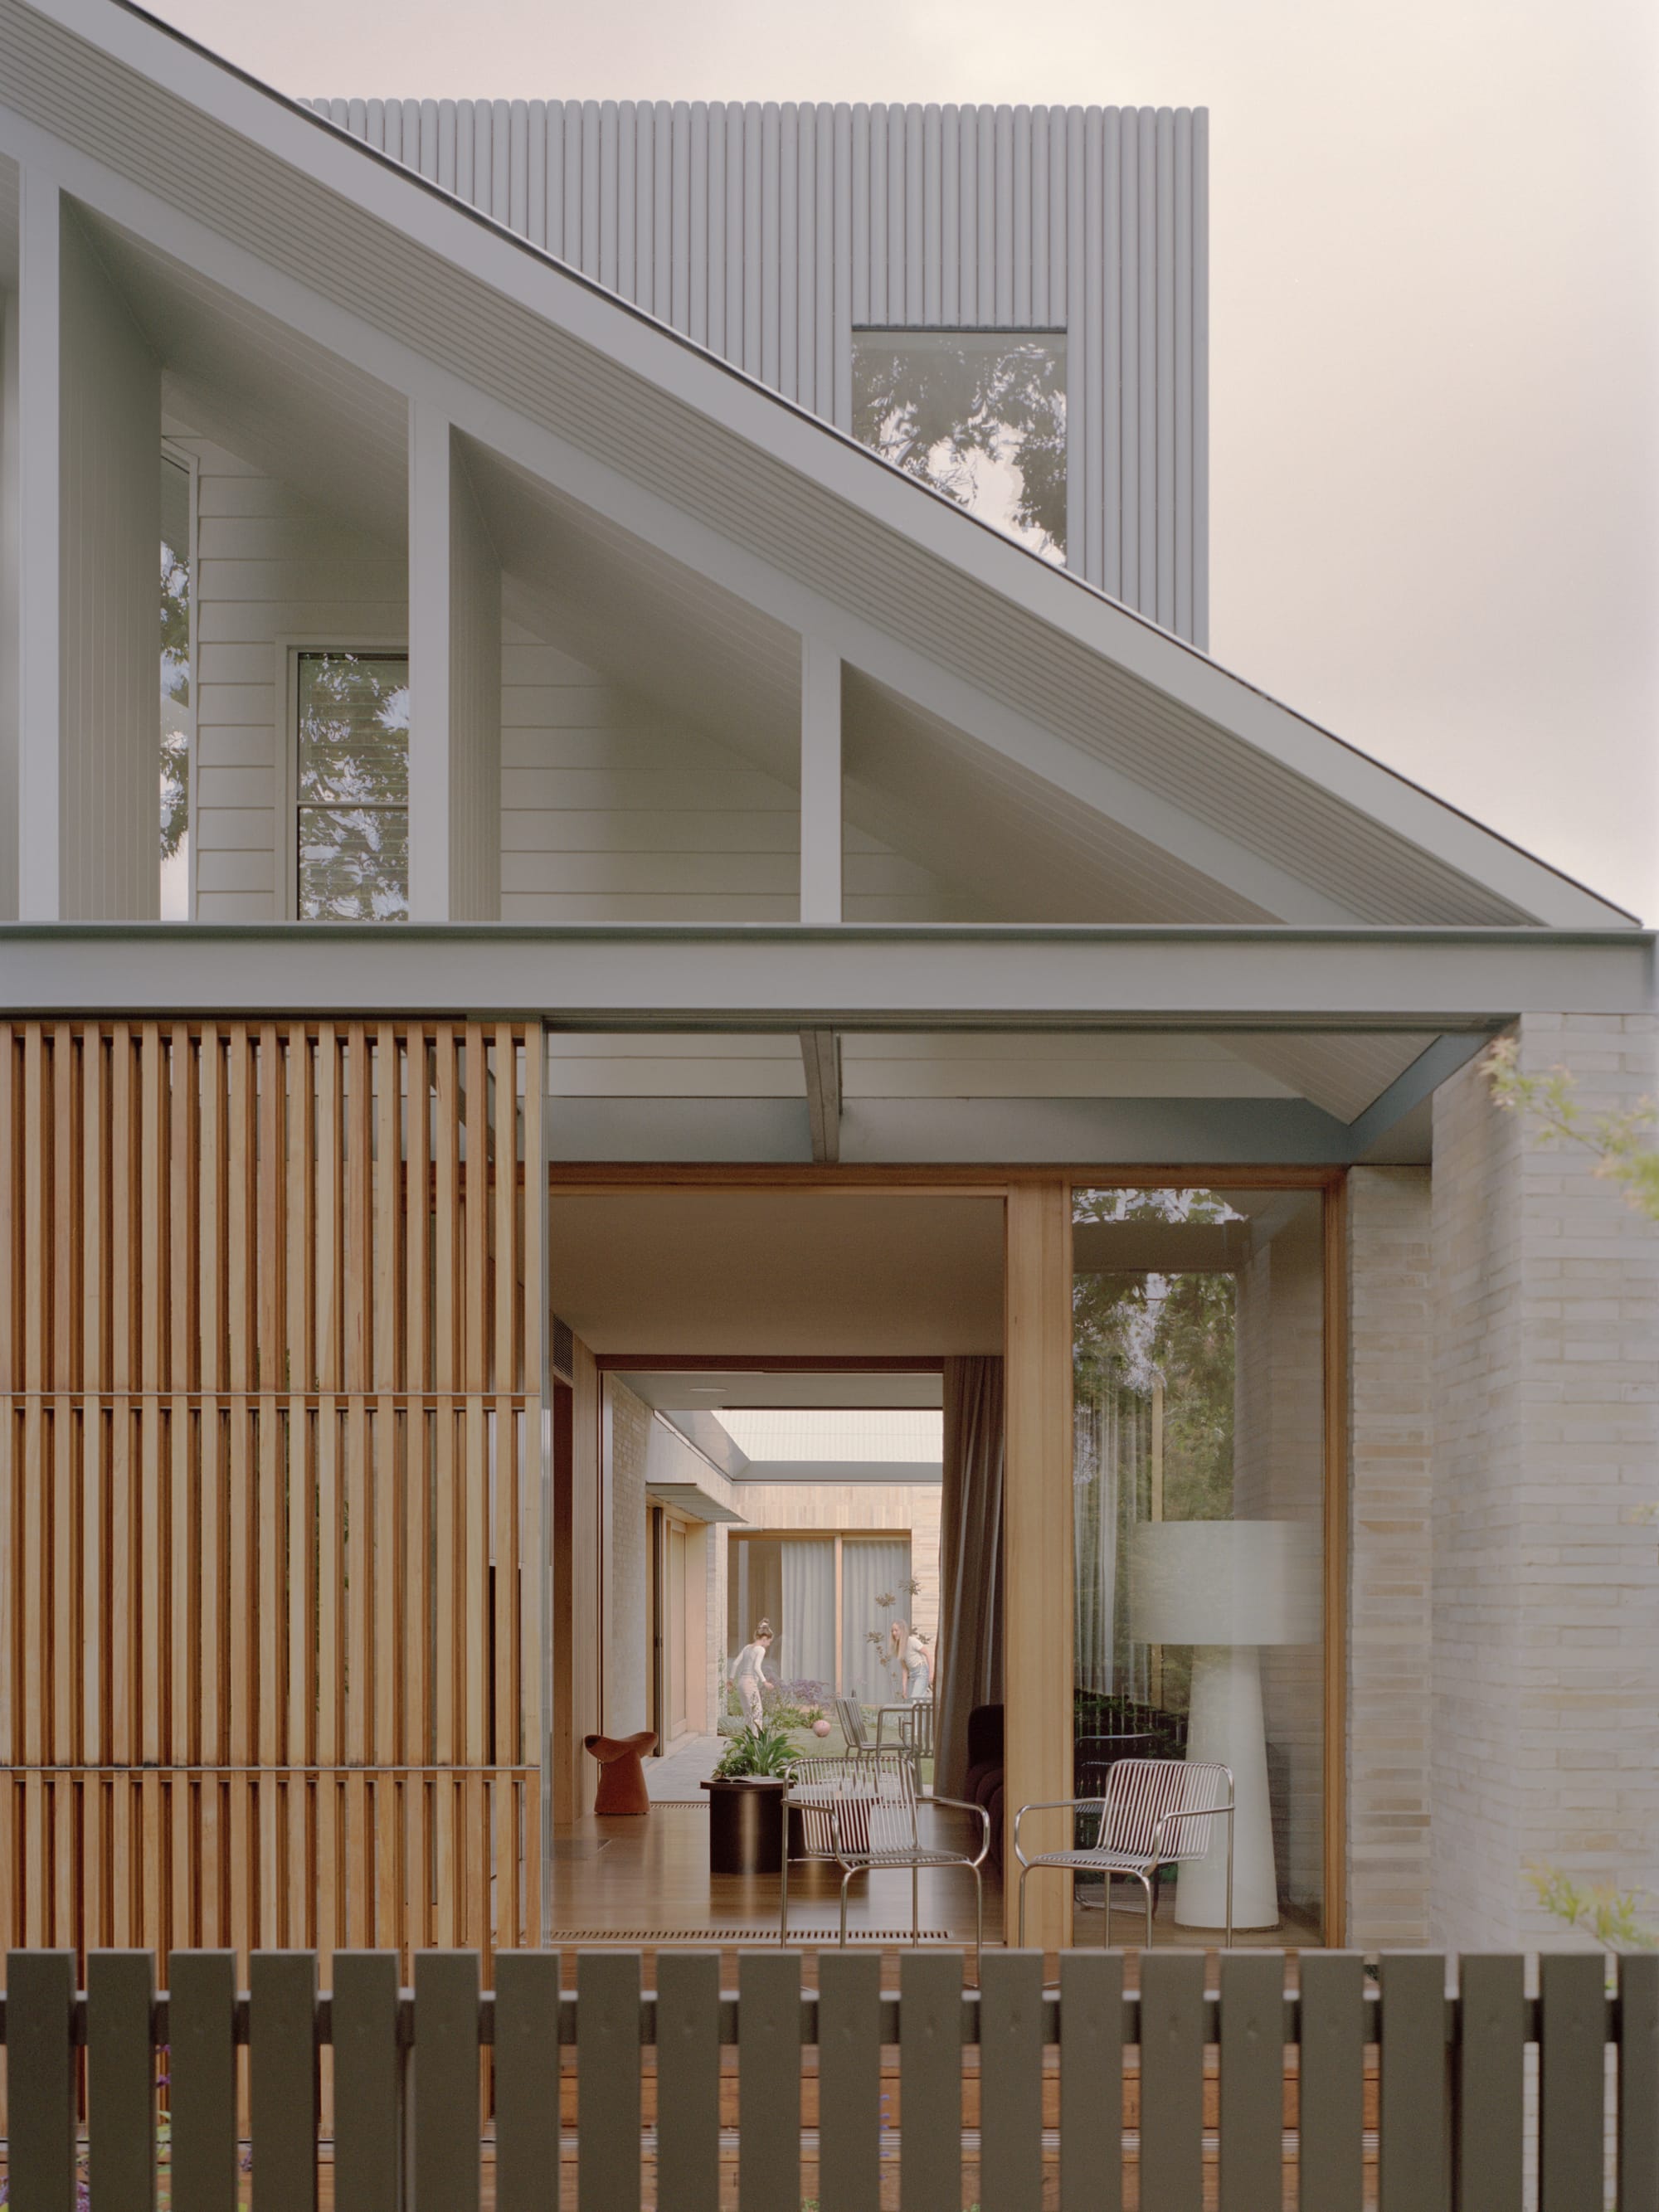 Gable Park by Weaver+Co Architects. Photography by Tasha Tylee. Facade of home with timber screening and open plan living. Courtyard visible through living space. Pitched roof. 